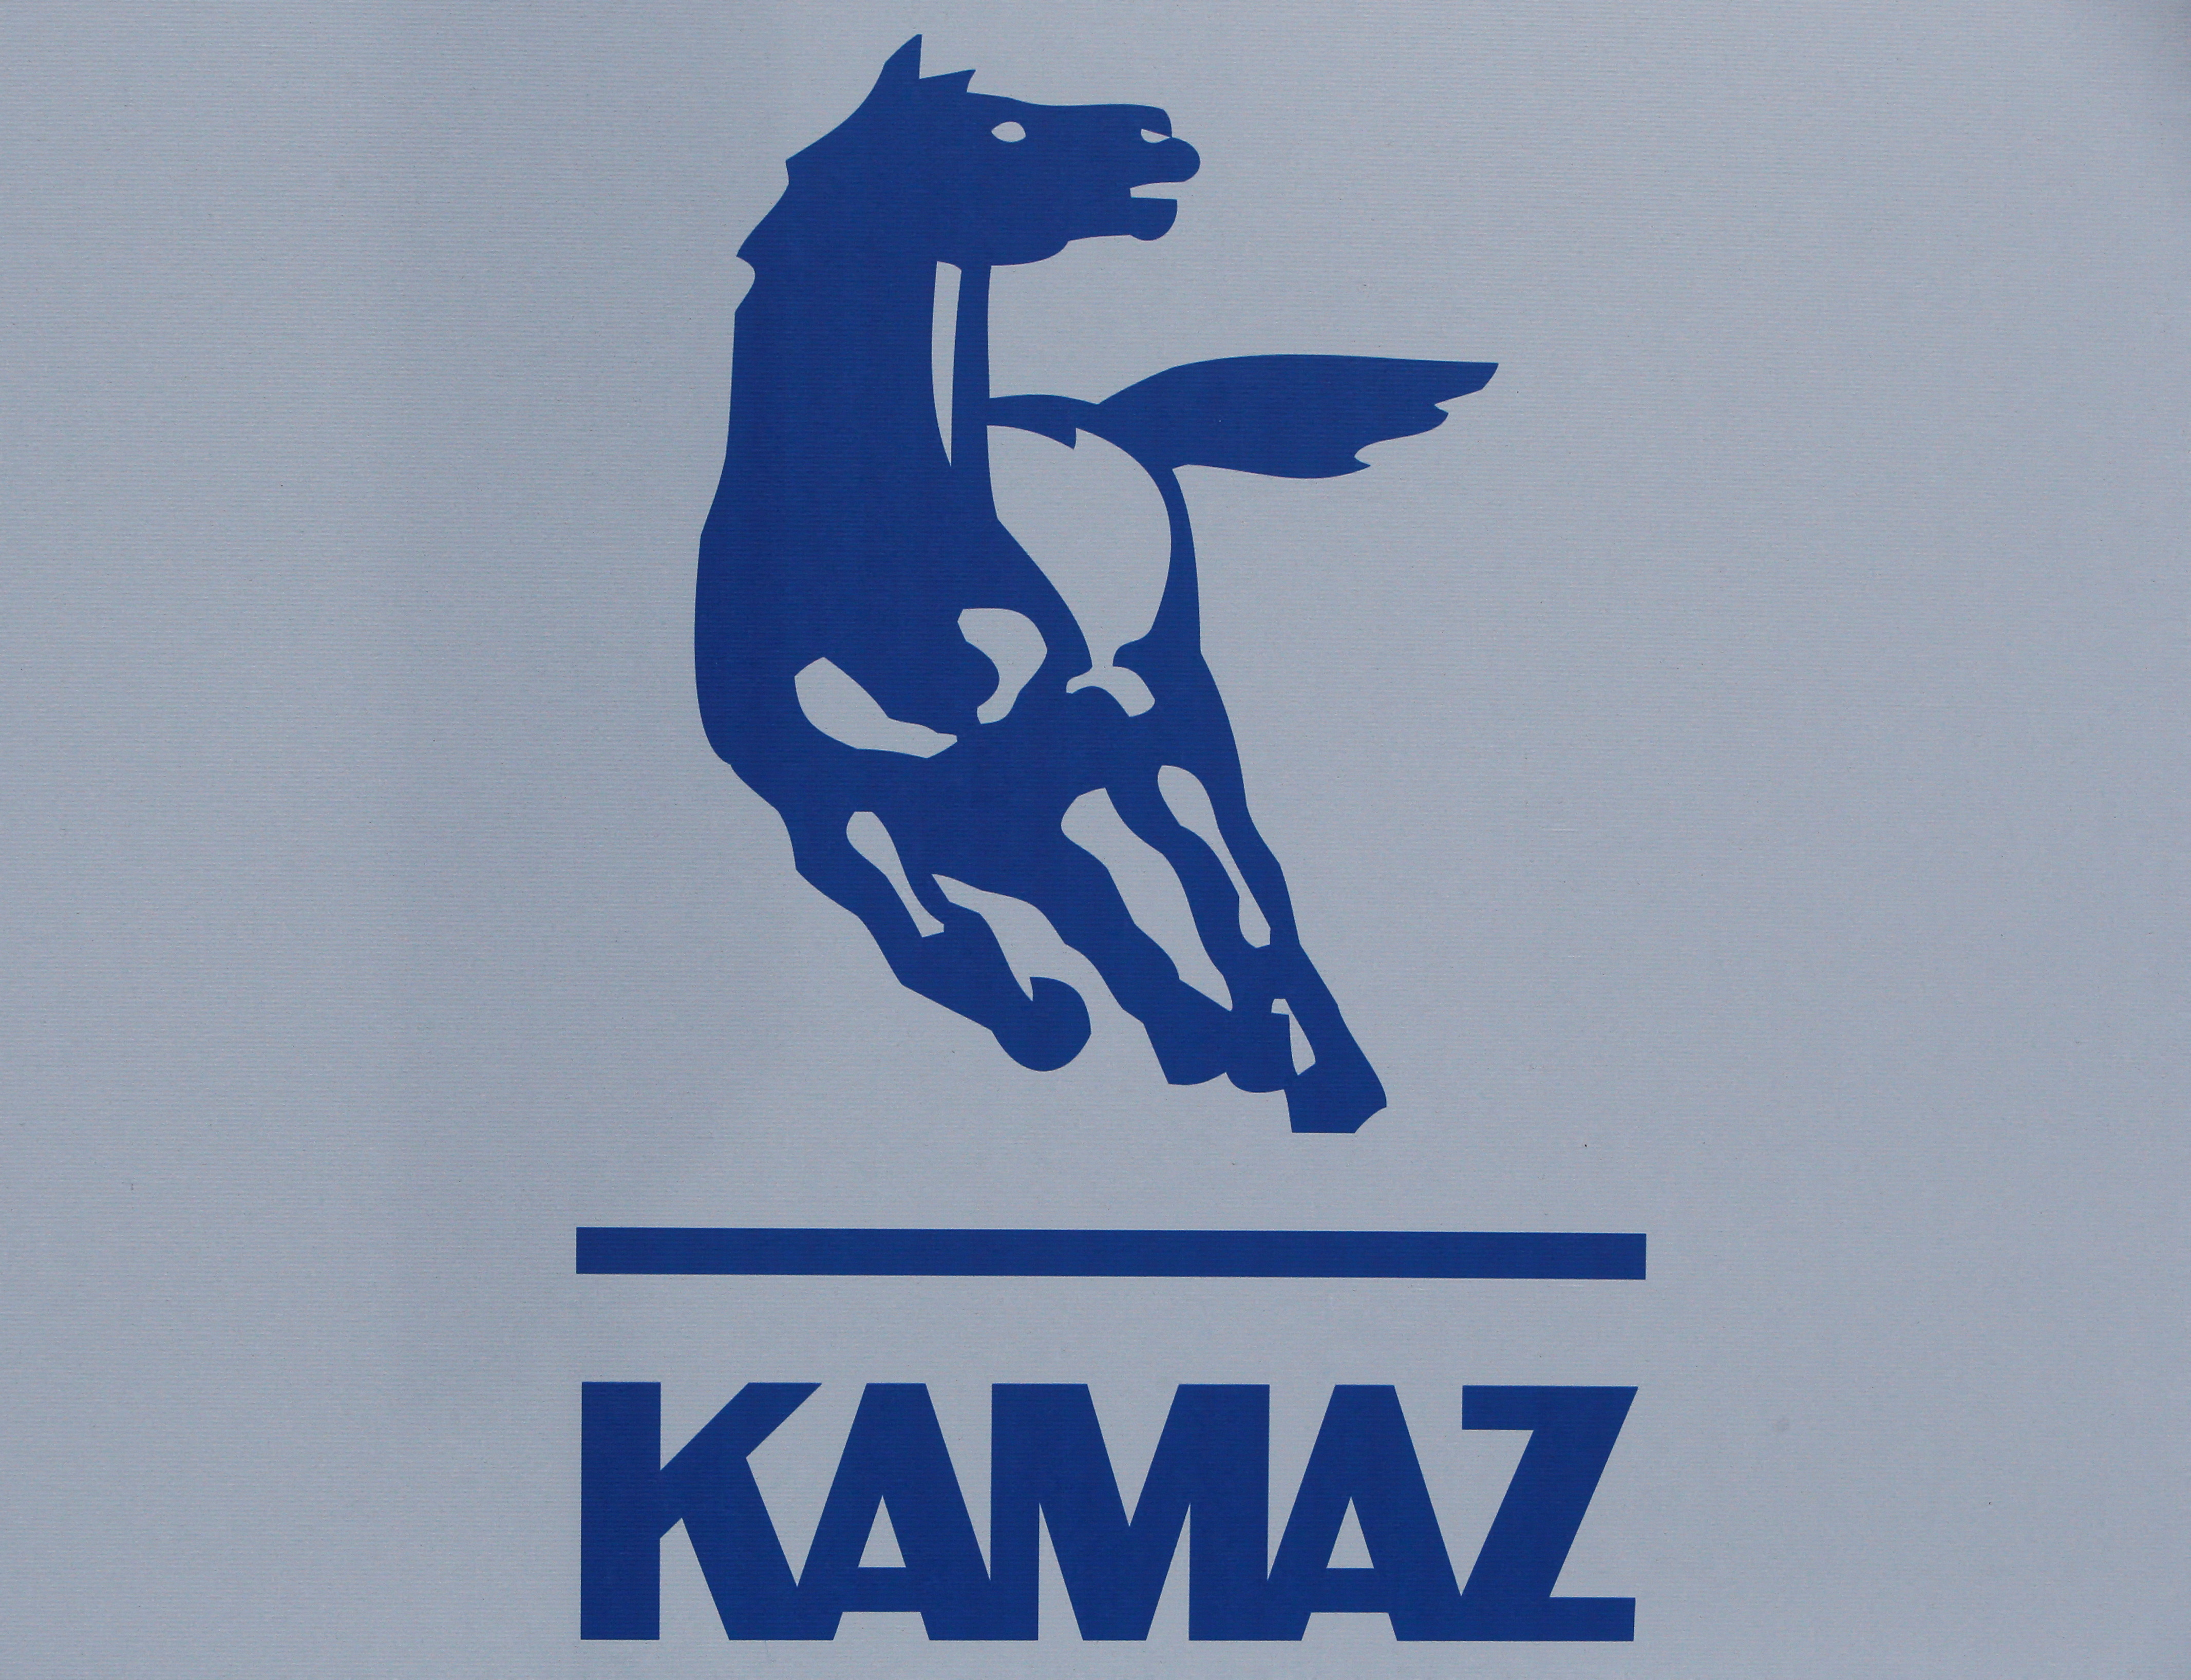 The logo of Russian truckmaker Kamaz is seen on a board at the SPIEF 2017 in St. Petersburg